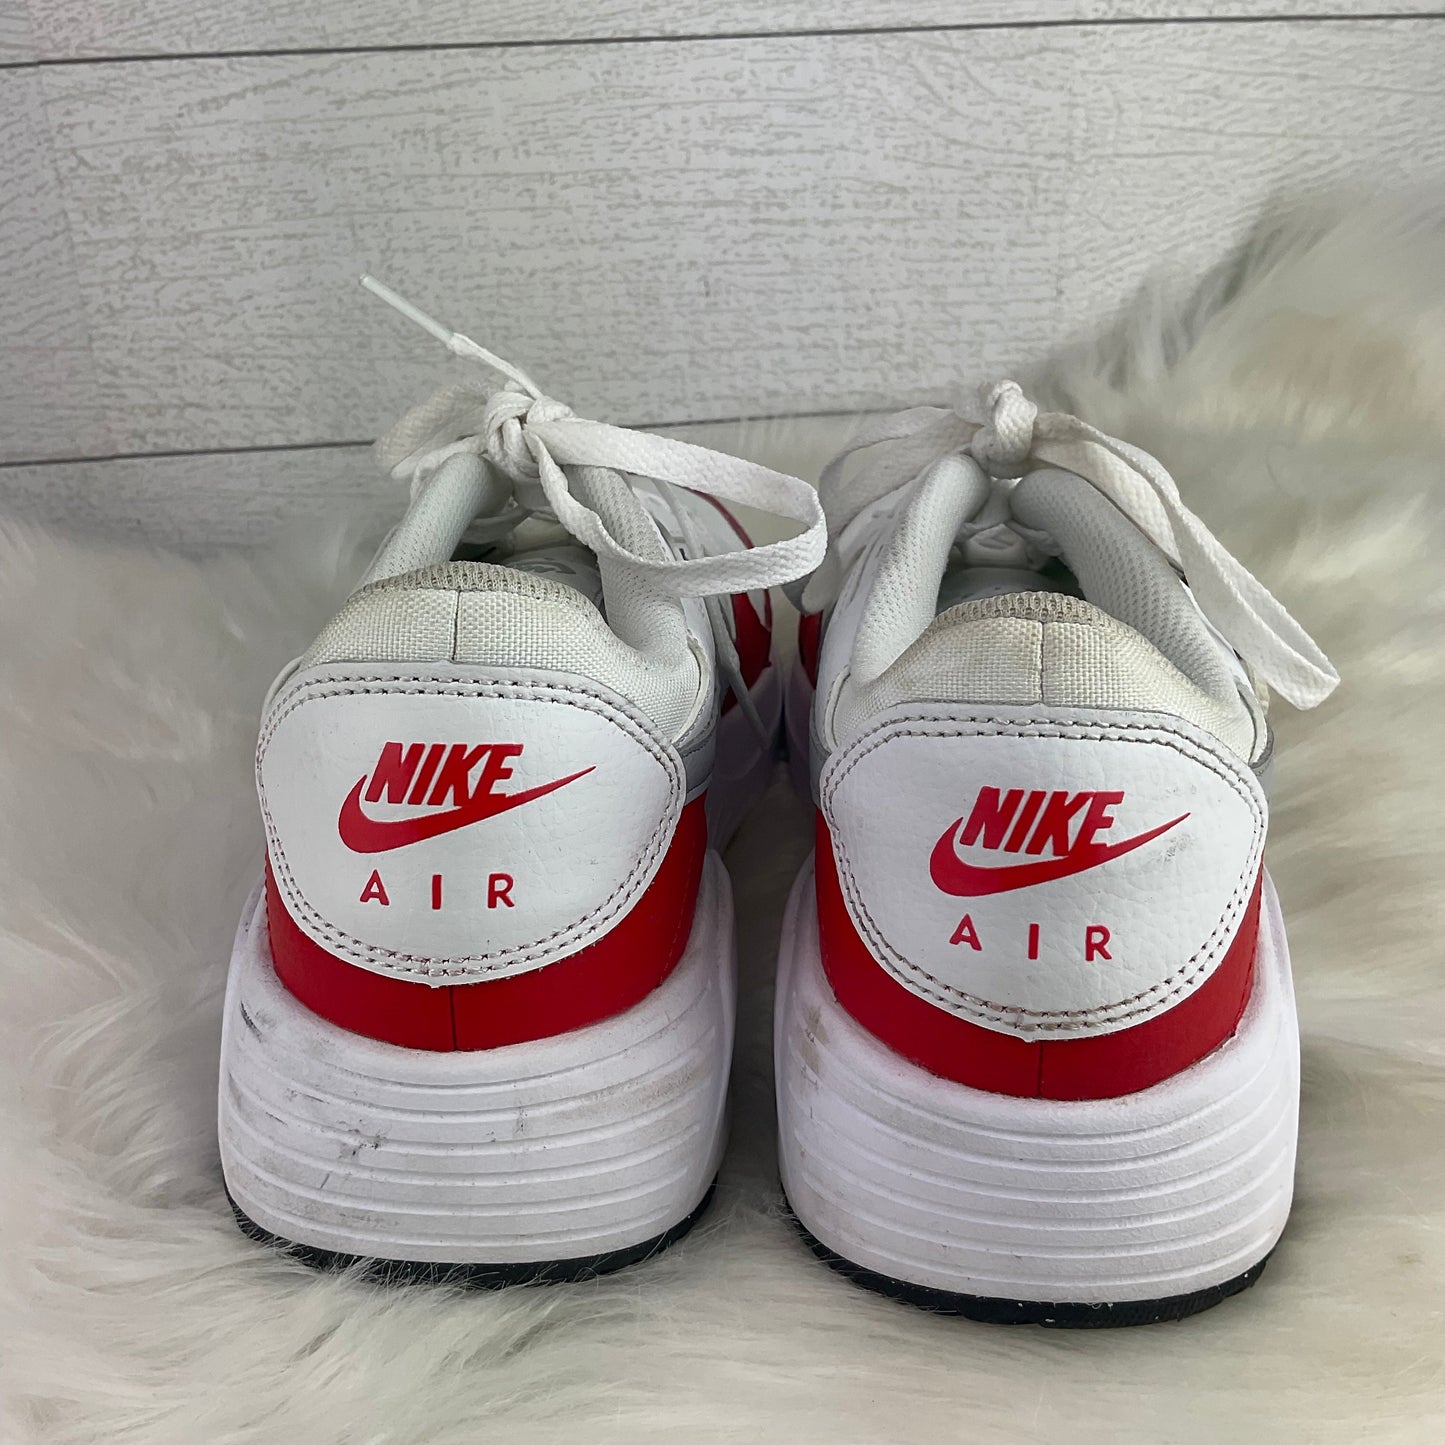 Red & White Shoes Athletic Nike, Size 9.5